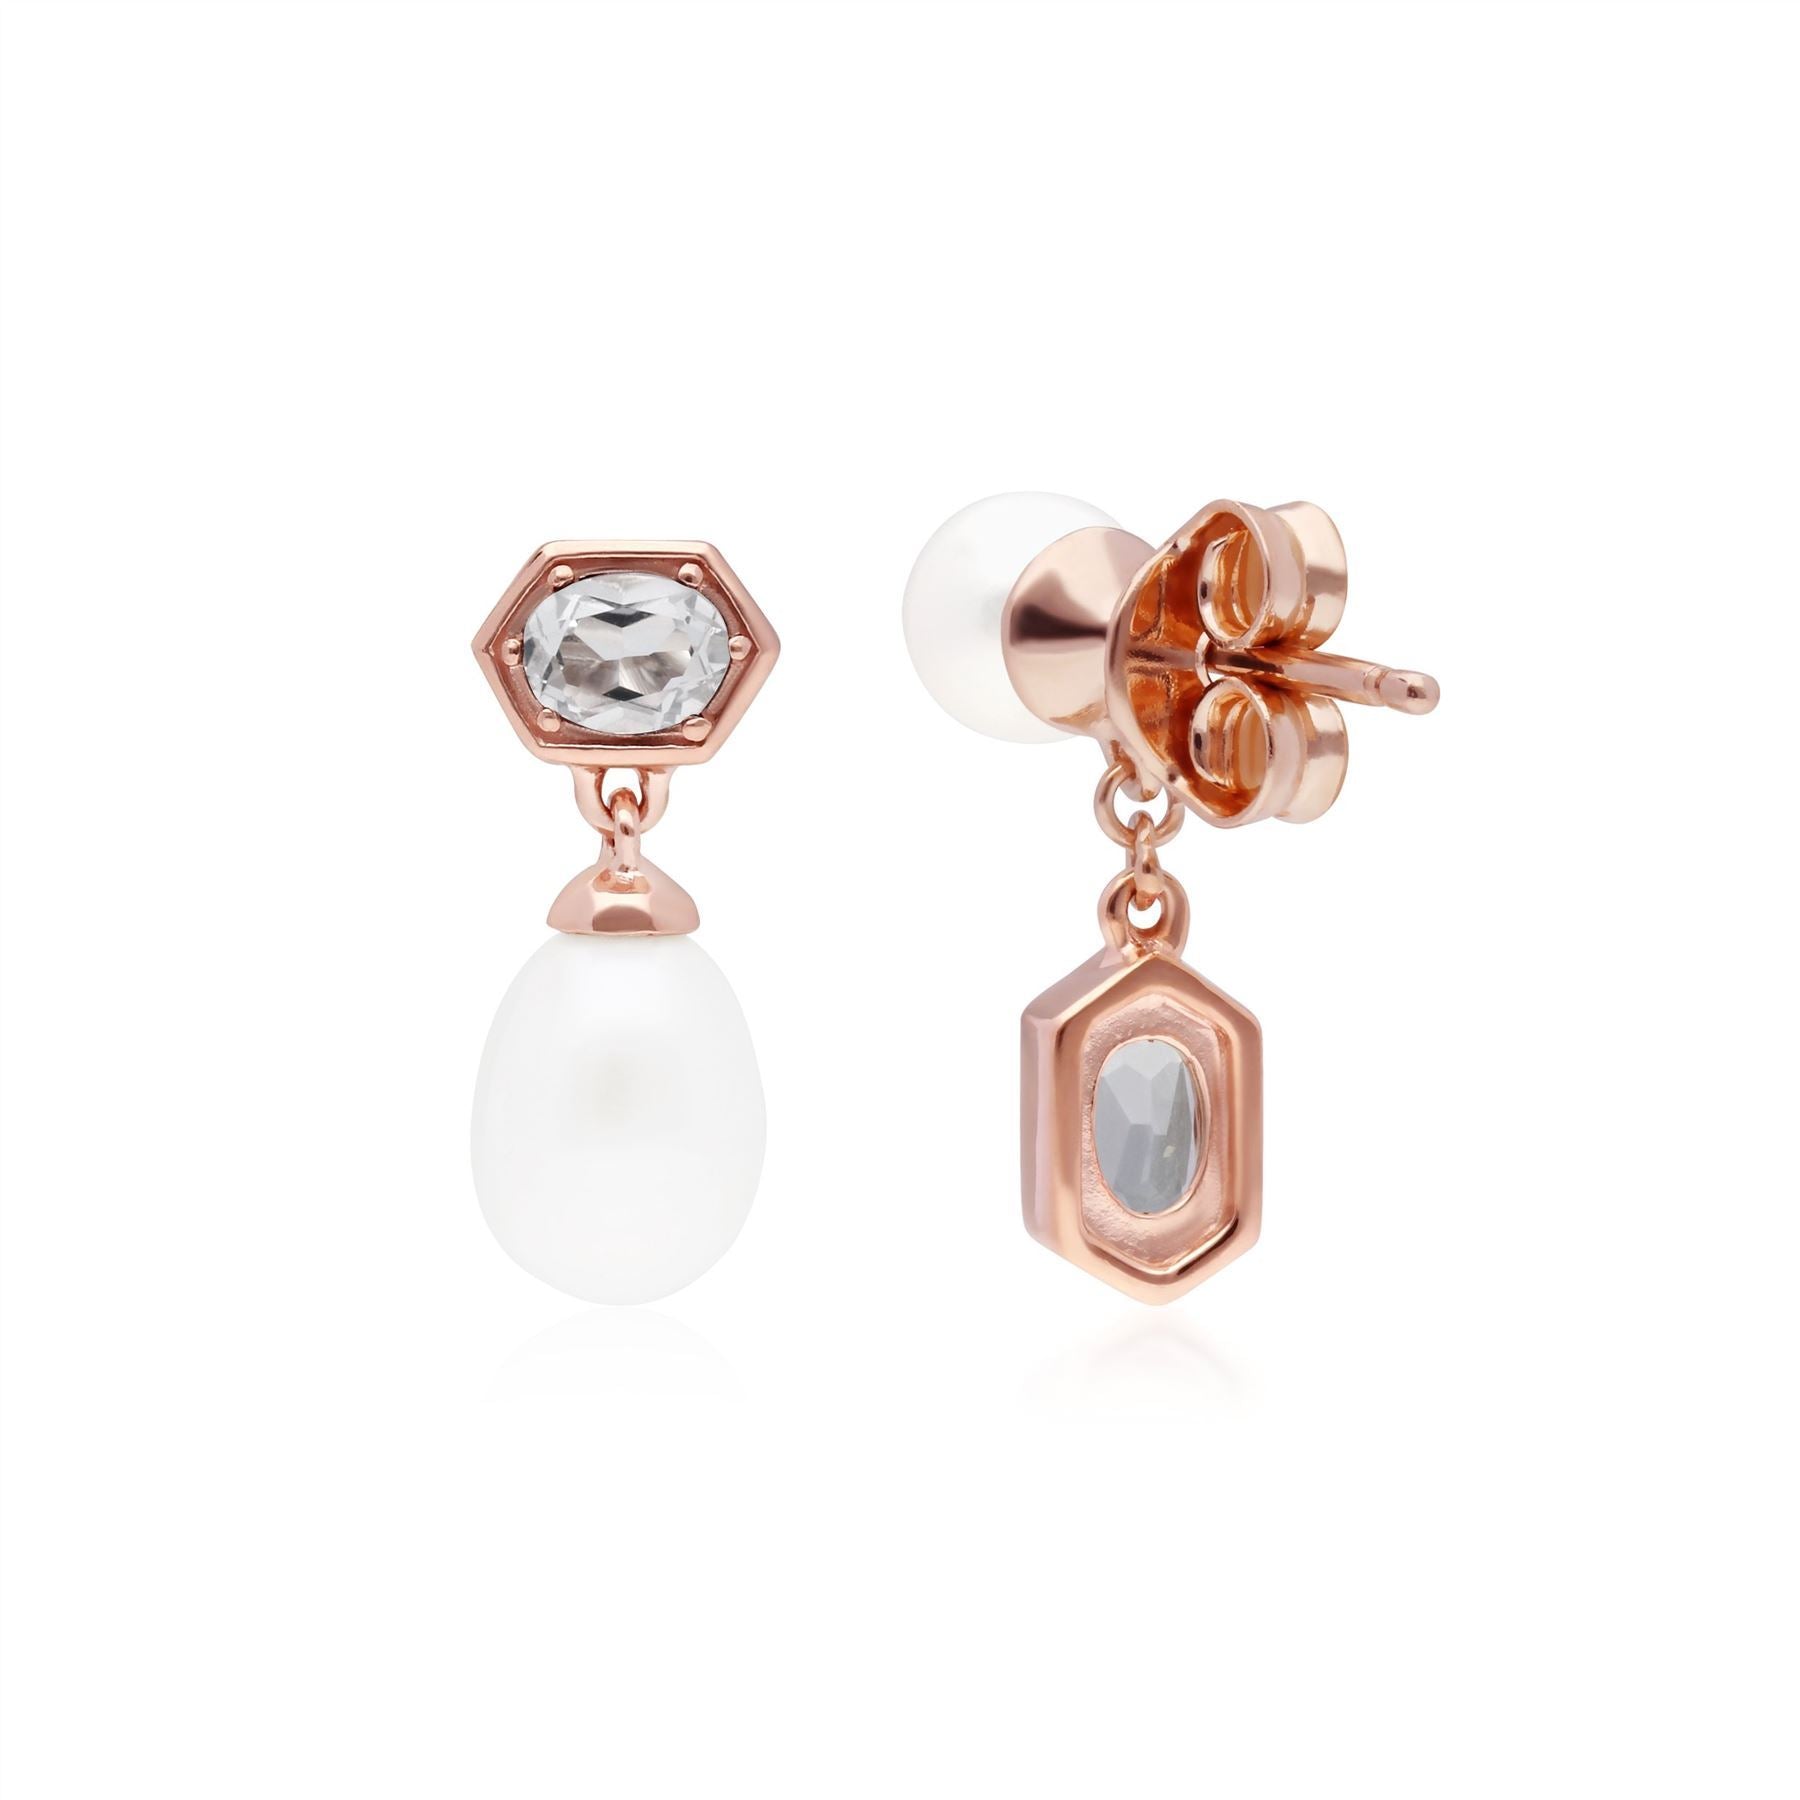 Modern Pearl & White Topaz Mismatched Drop Earrings in Rose Gold Plated Sterling Silver